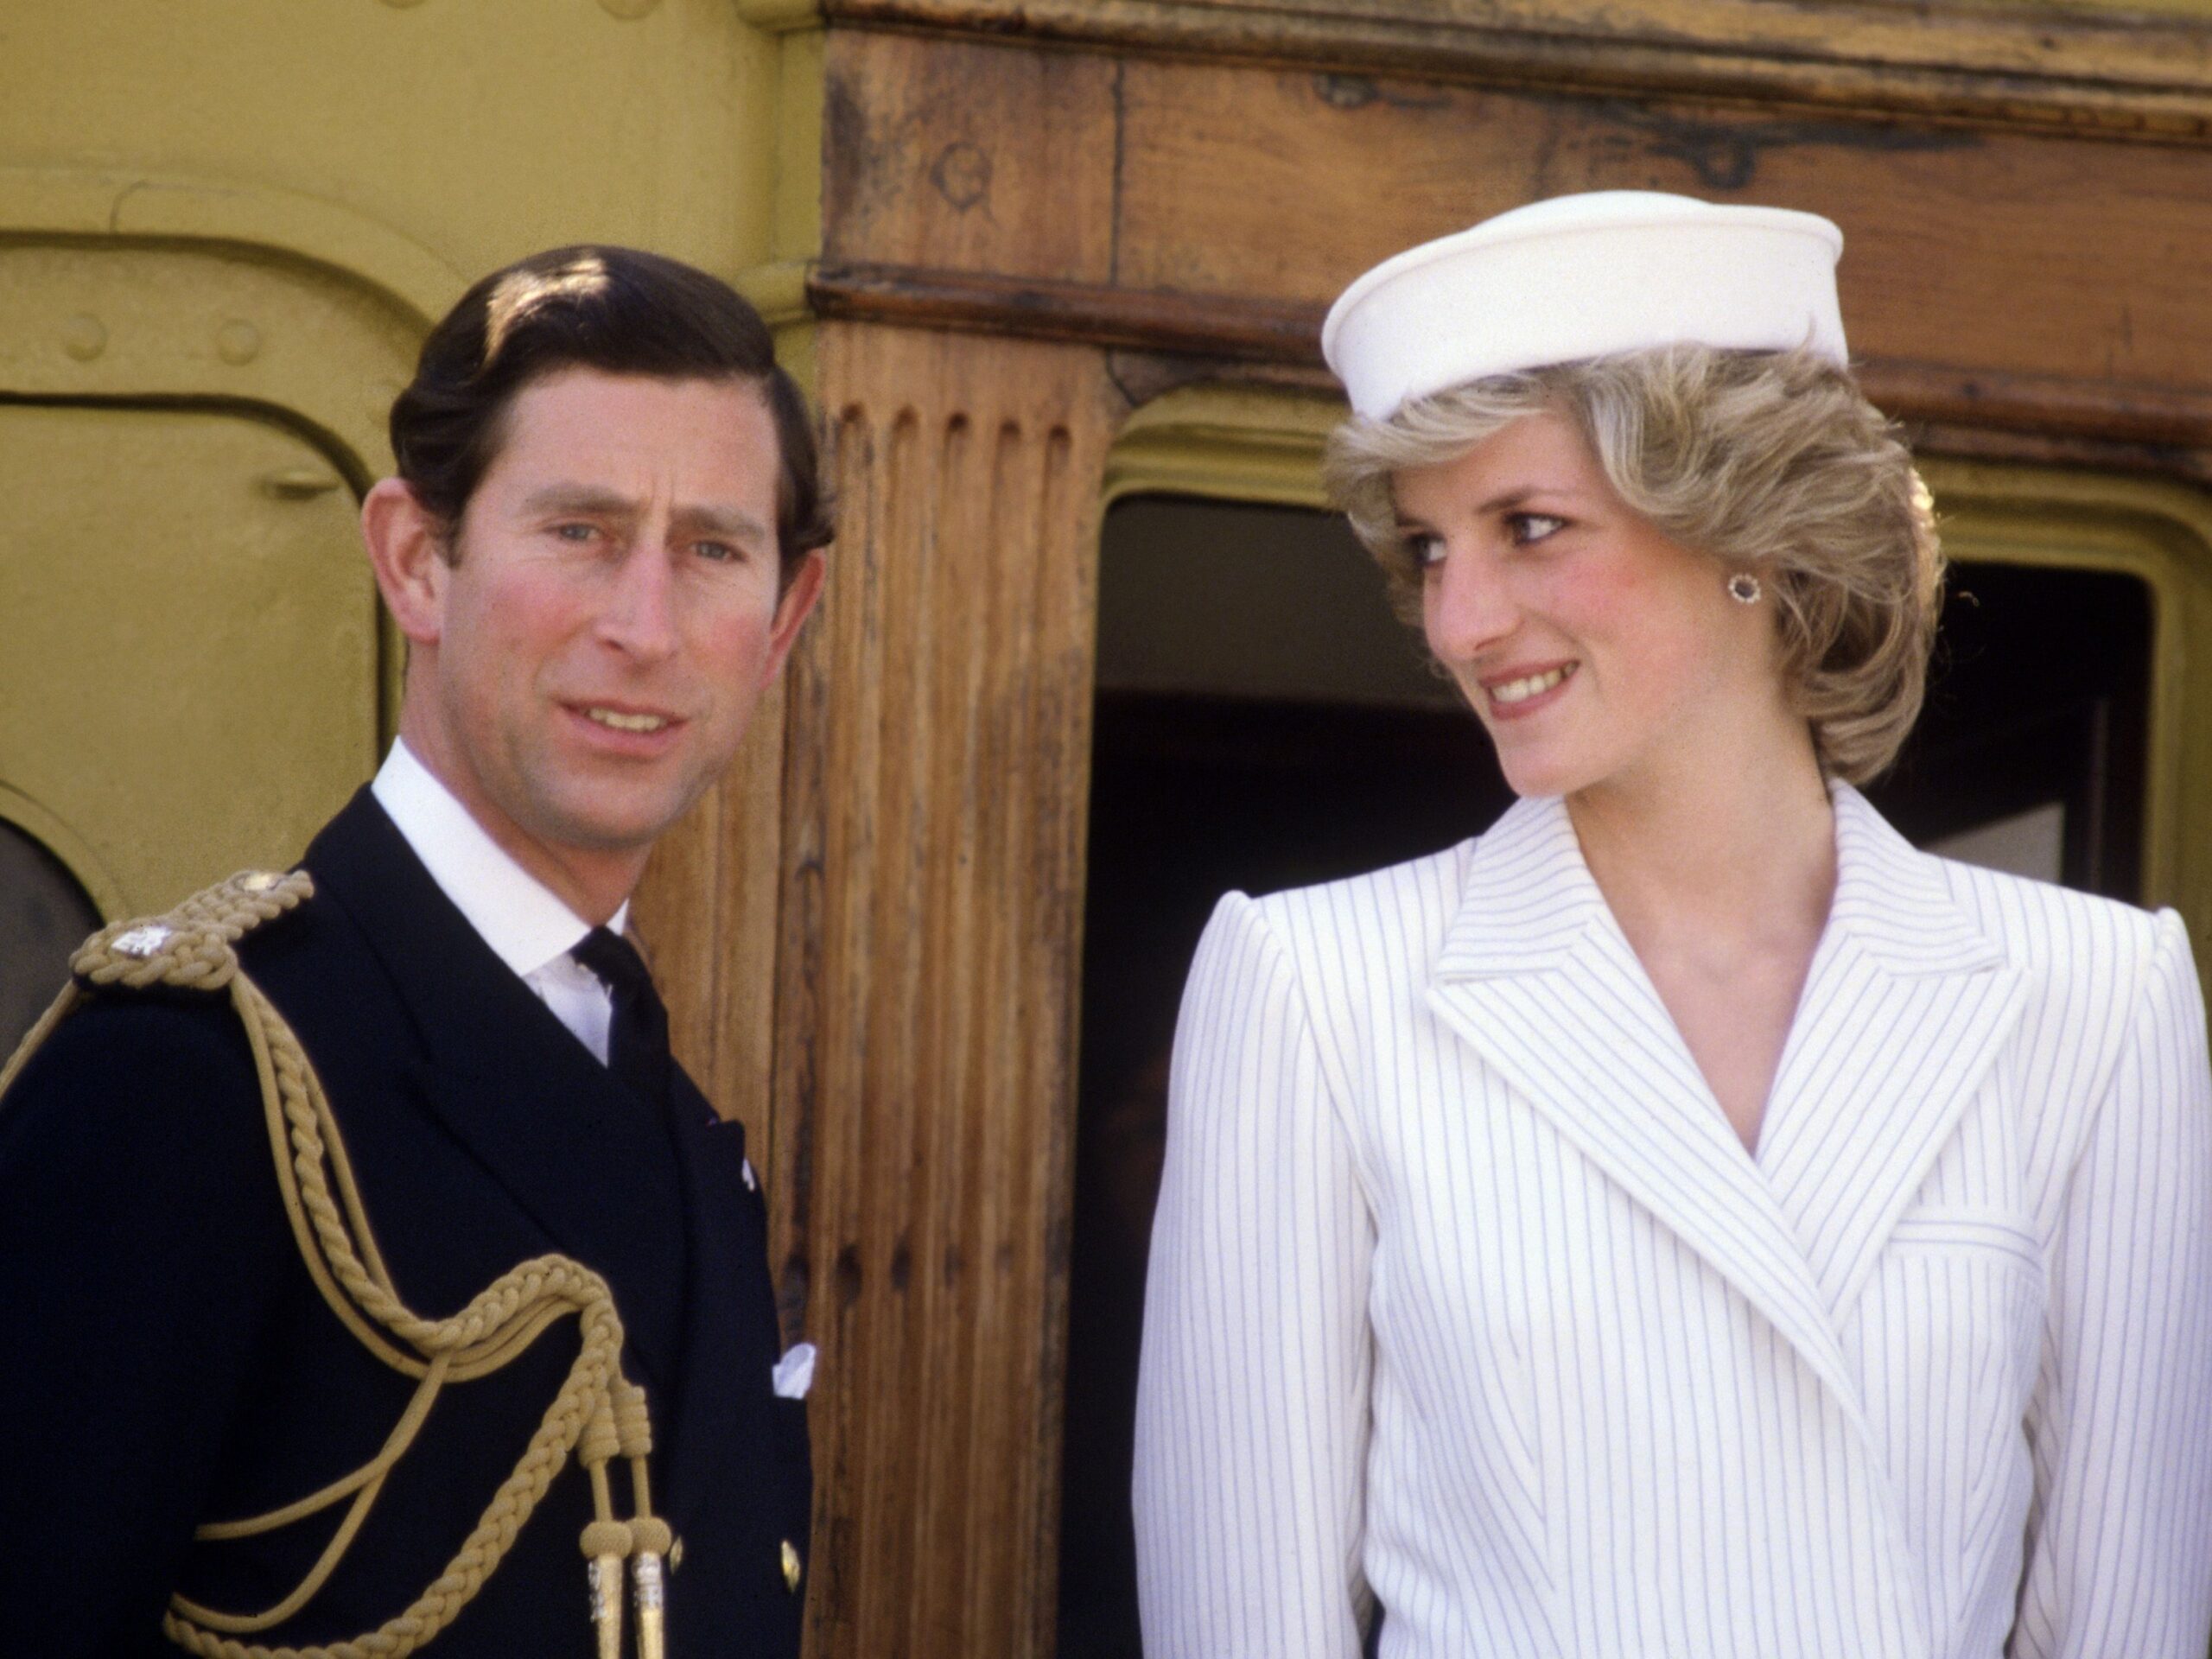 Diana and Charles' secret separation sparked 'corrosive effect' among aides